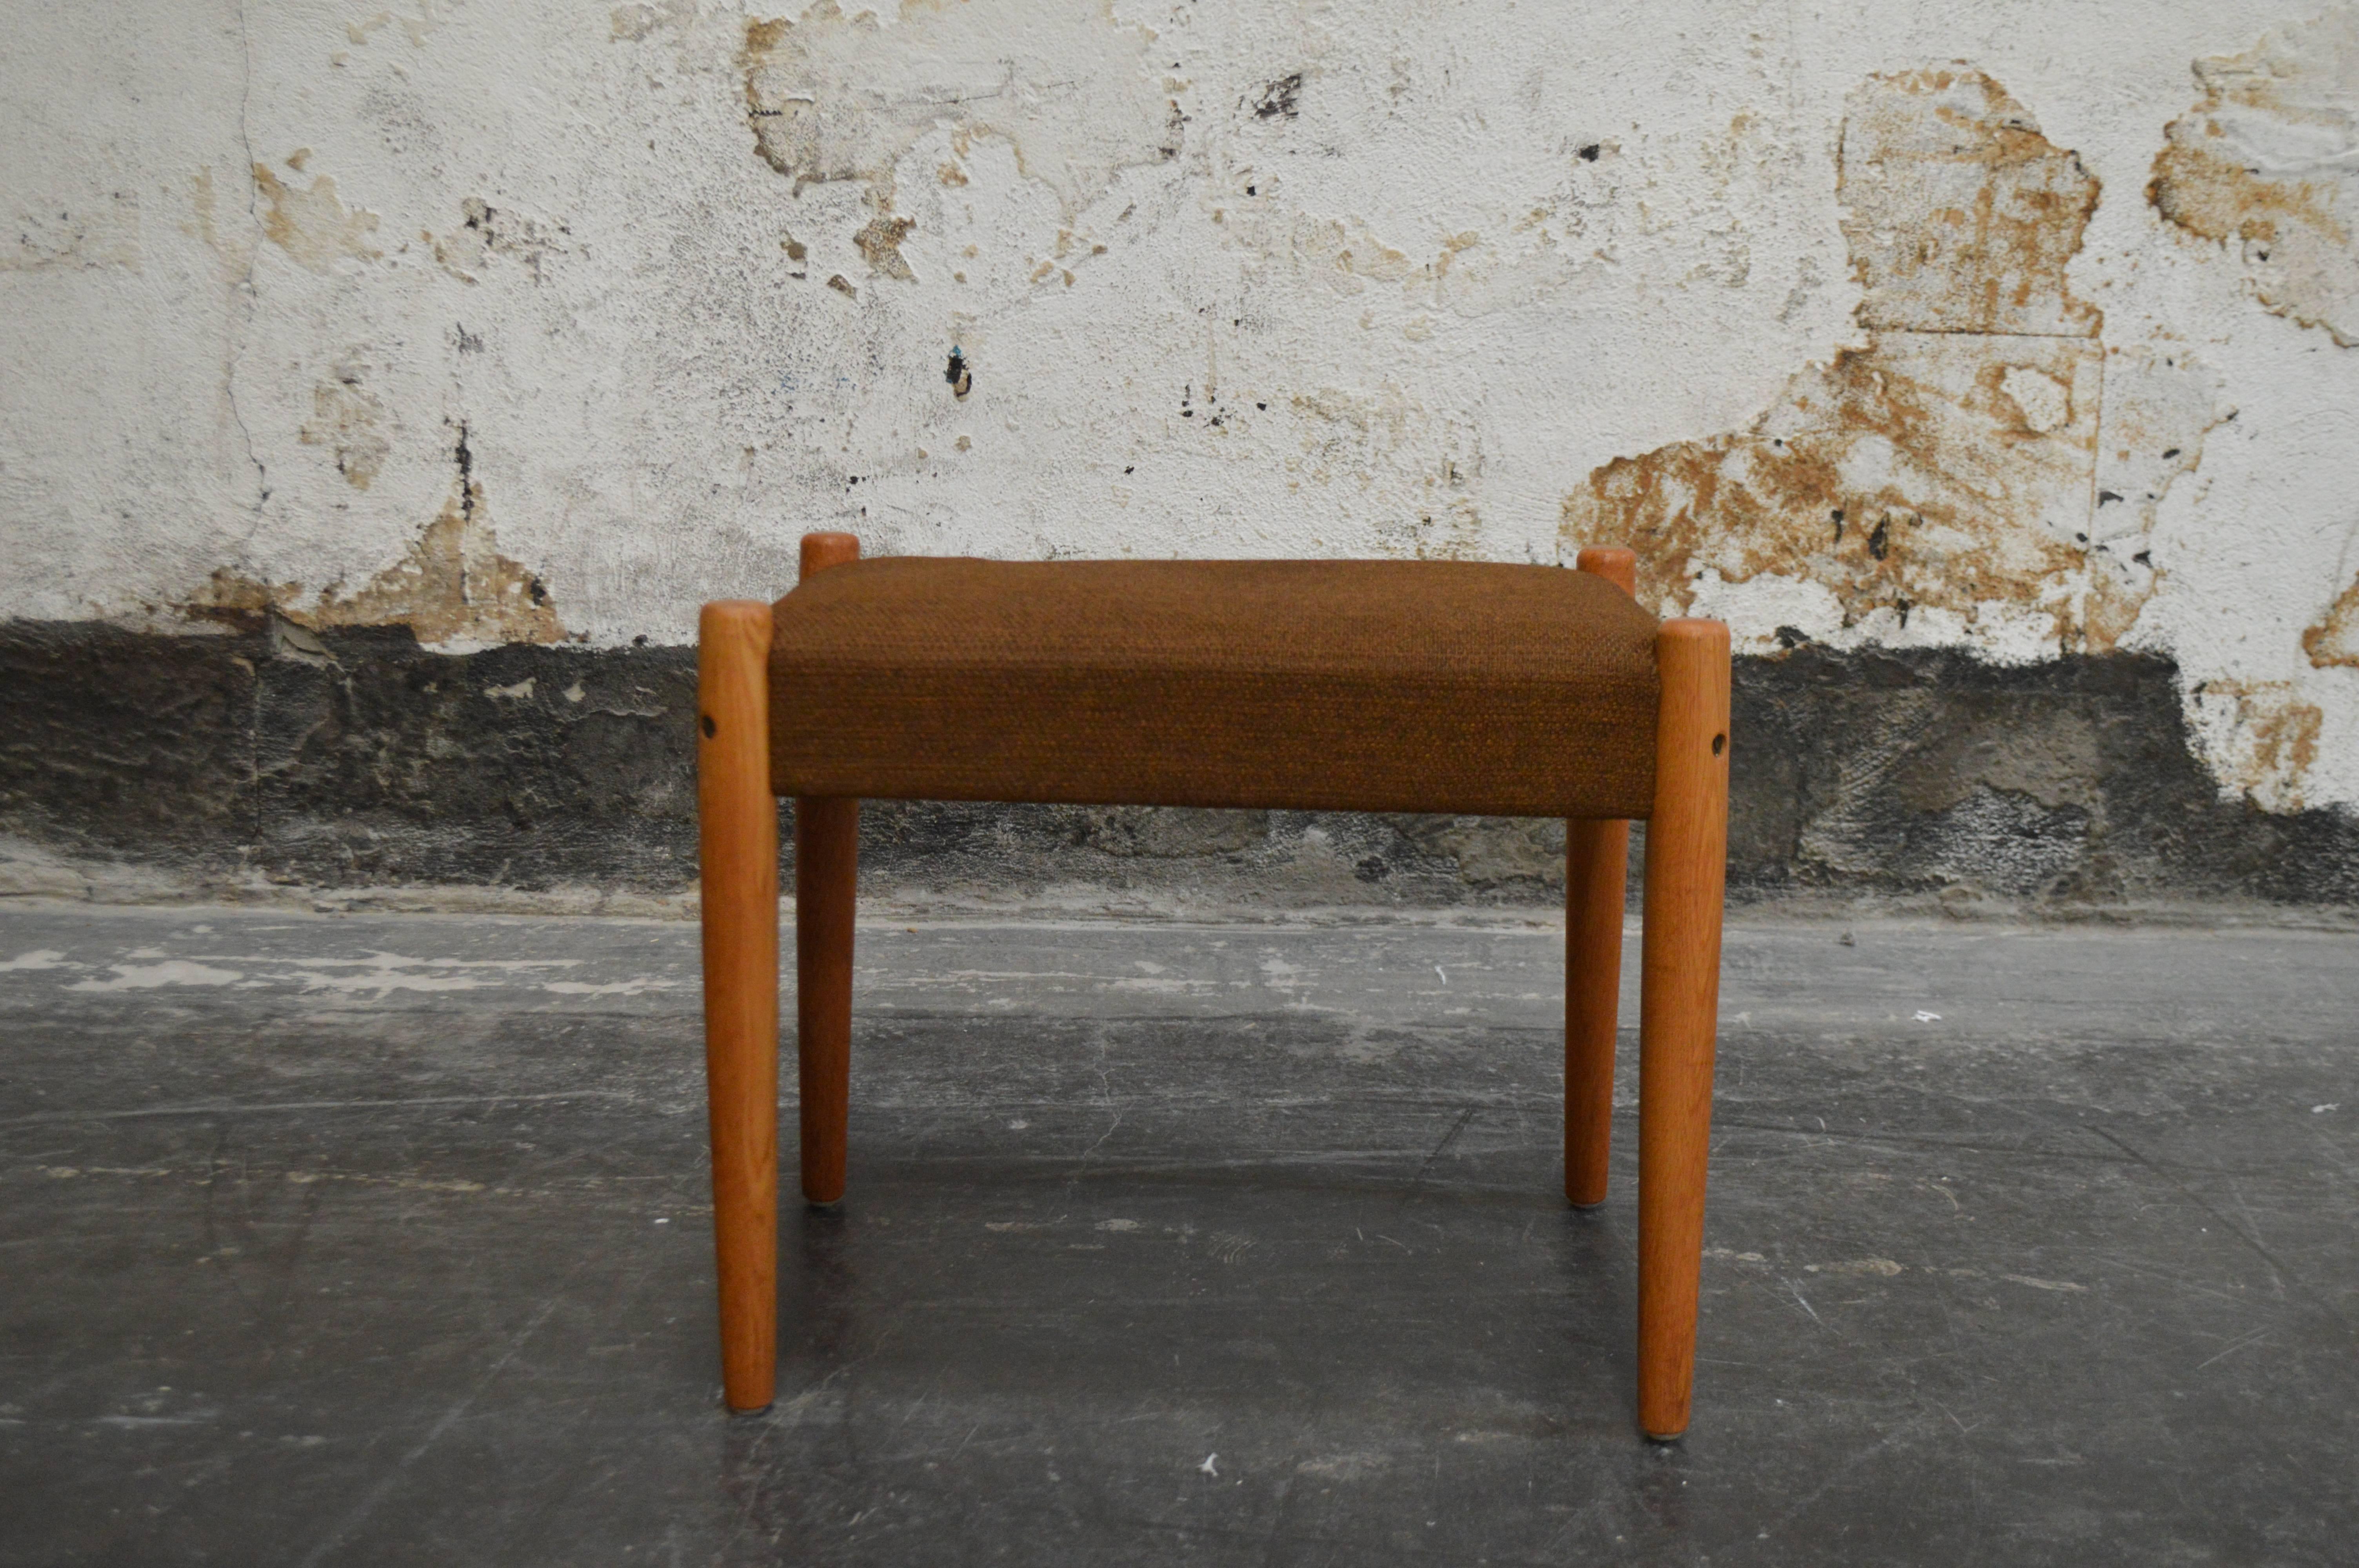 This vintage Danish modern footstool features sturdy teak legs with original brown tweed upholstery. Can be reupholstered in any COM fabric. This handsome stool makes a sturdy and stylish addition to any interior.